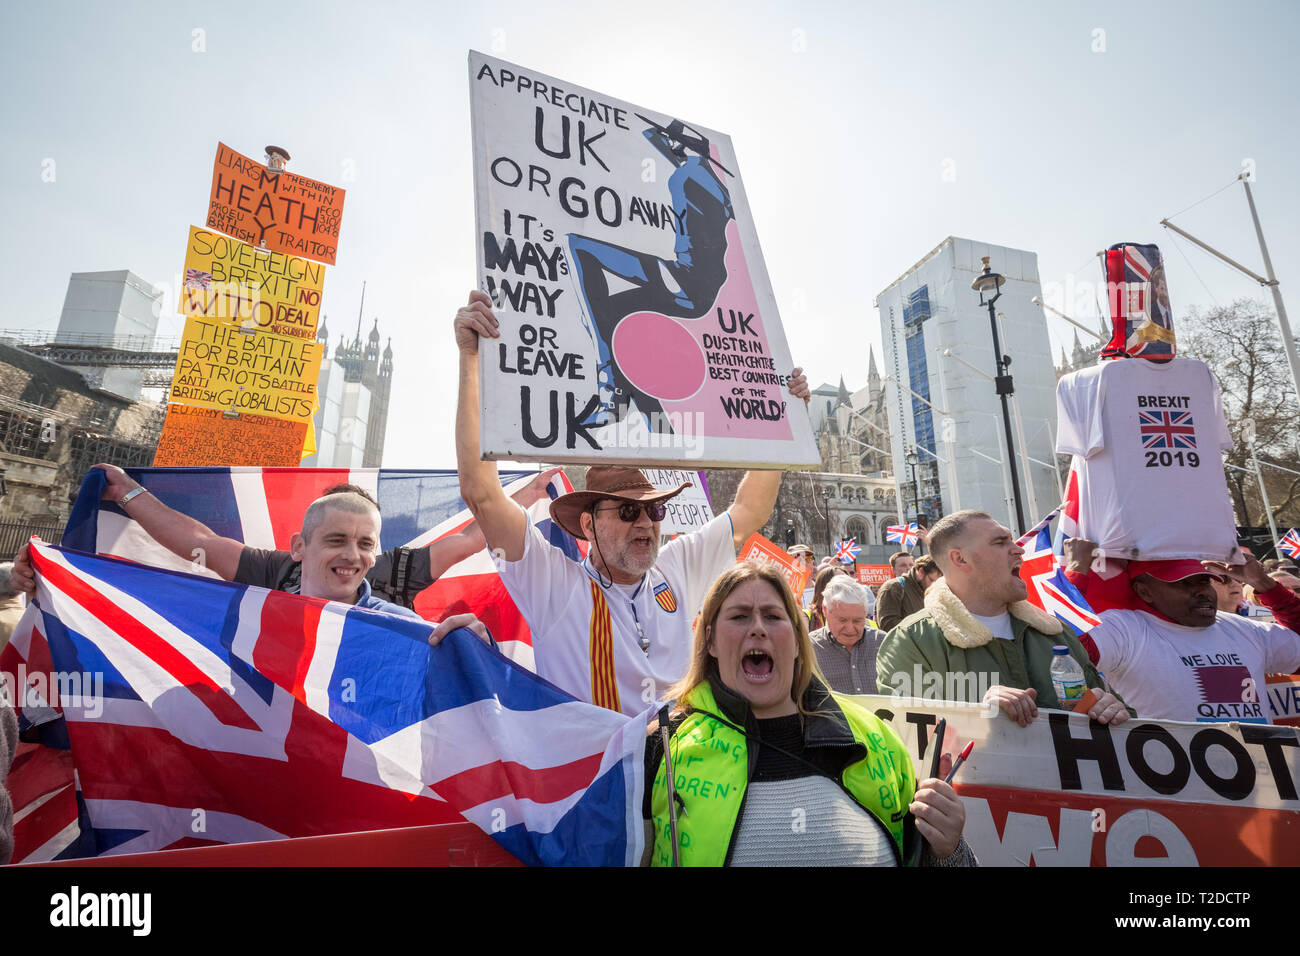 Pro-Brexit supporters gather with flags and placards for ‘Brexit Day’ protest in Westminster demanding Britain leaves the EU without further delay. Stock Photo